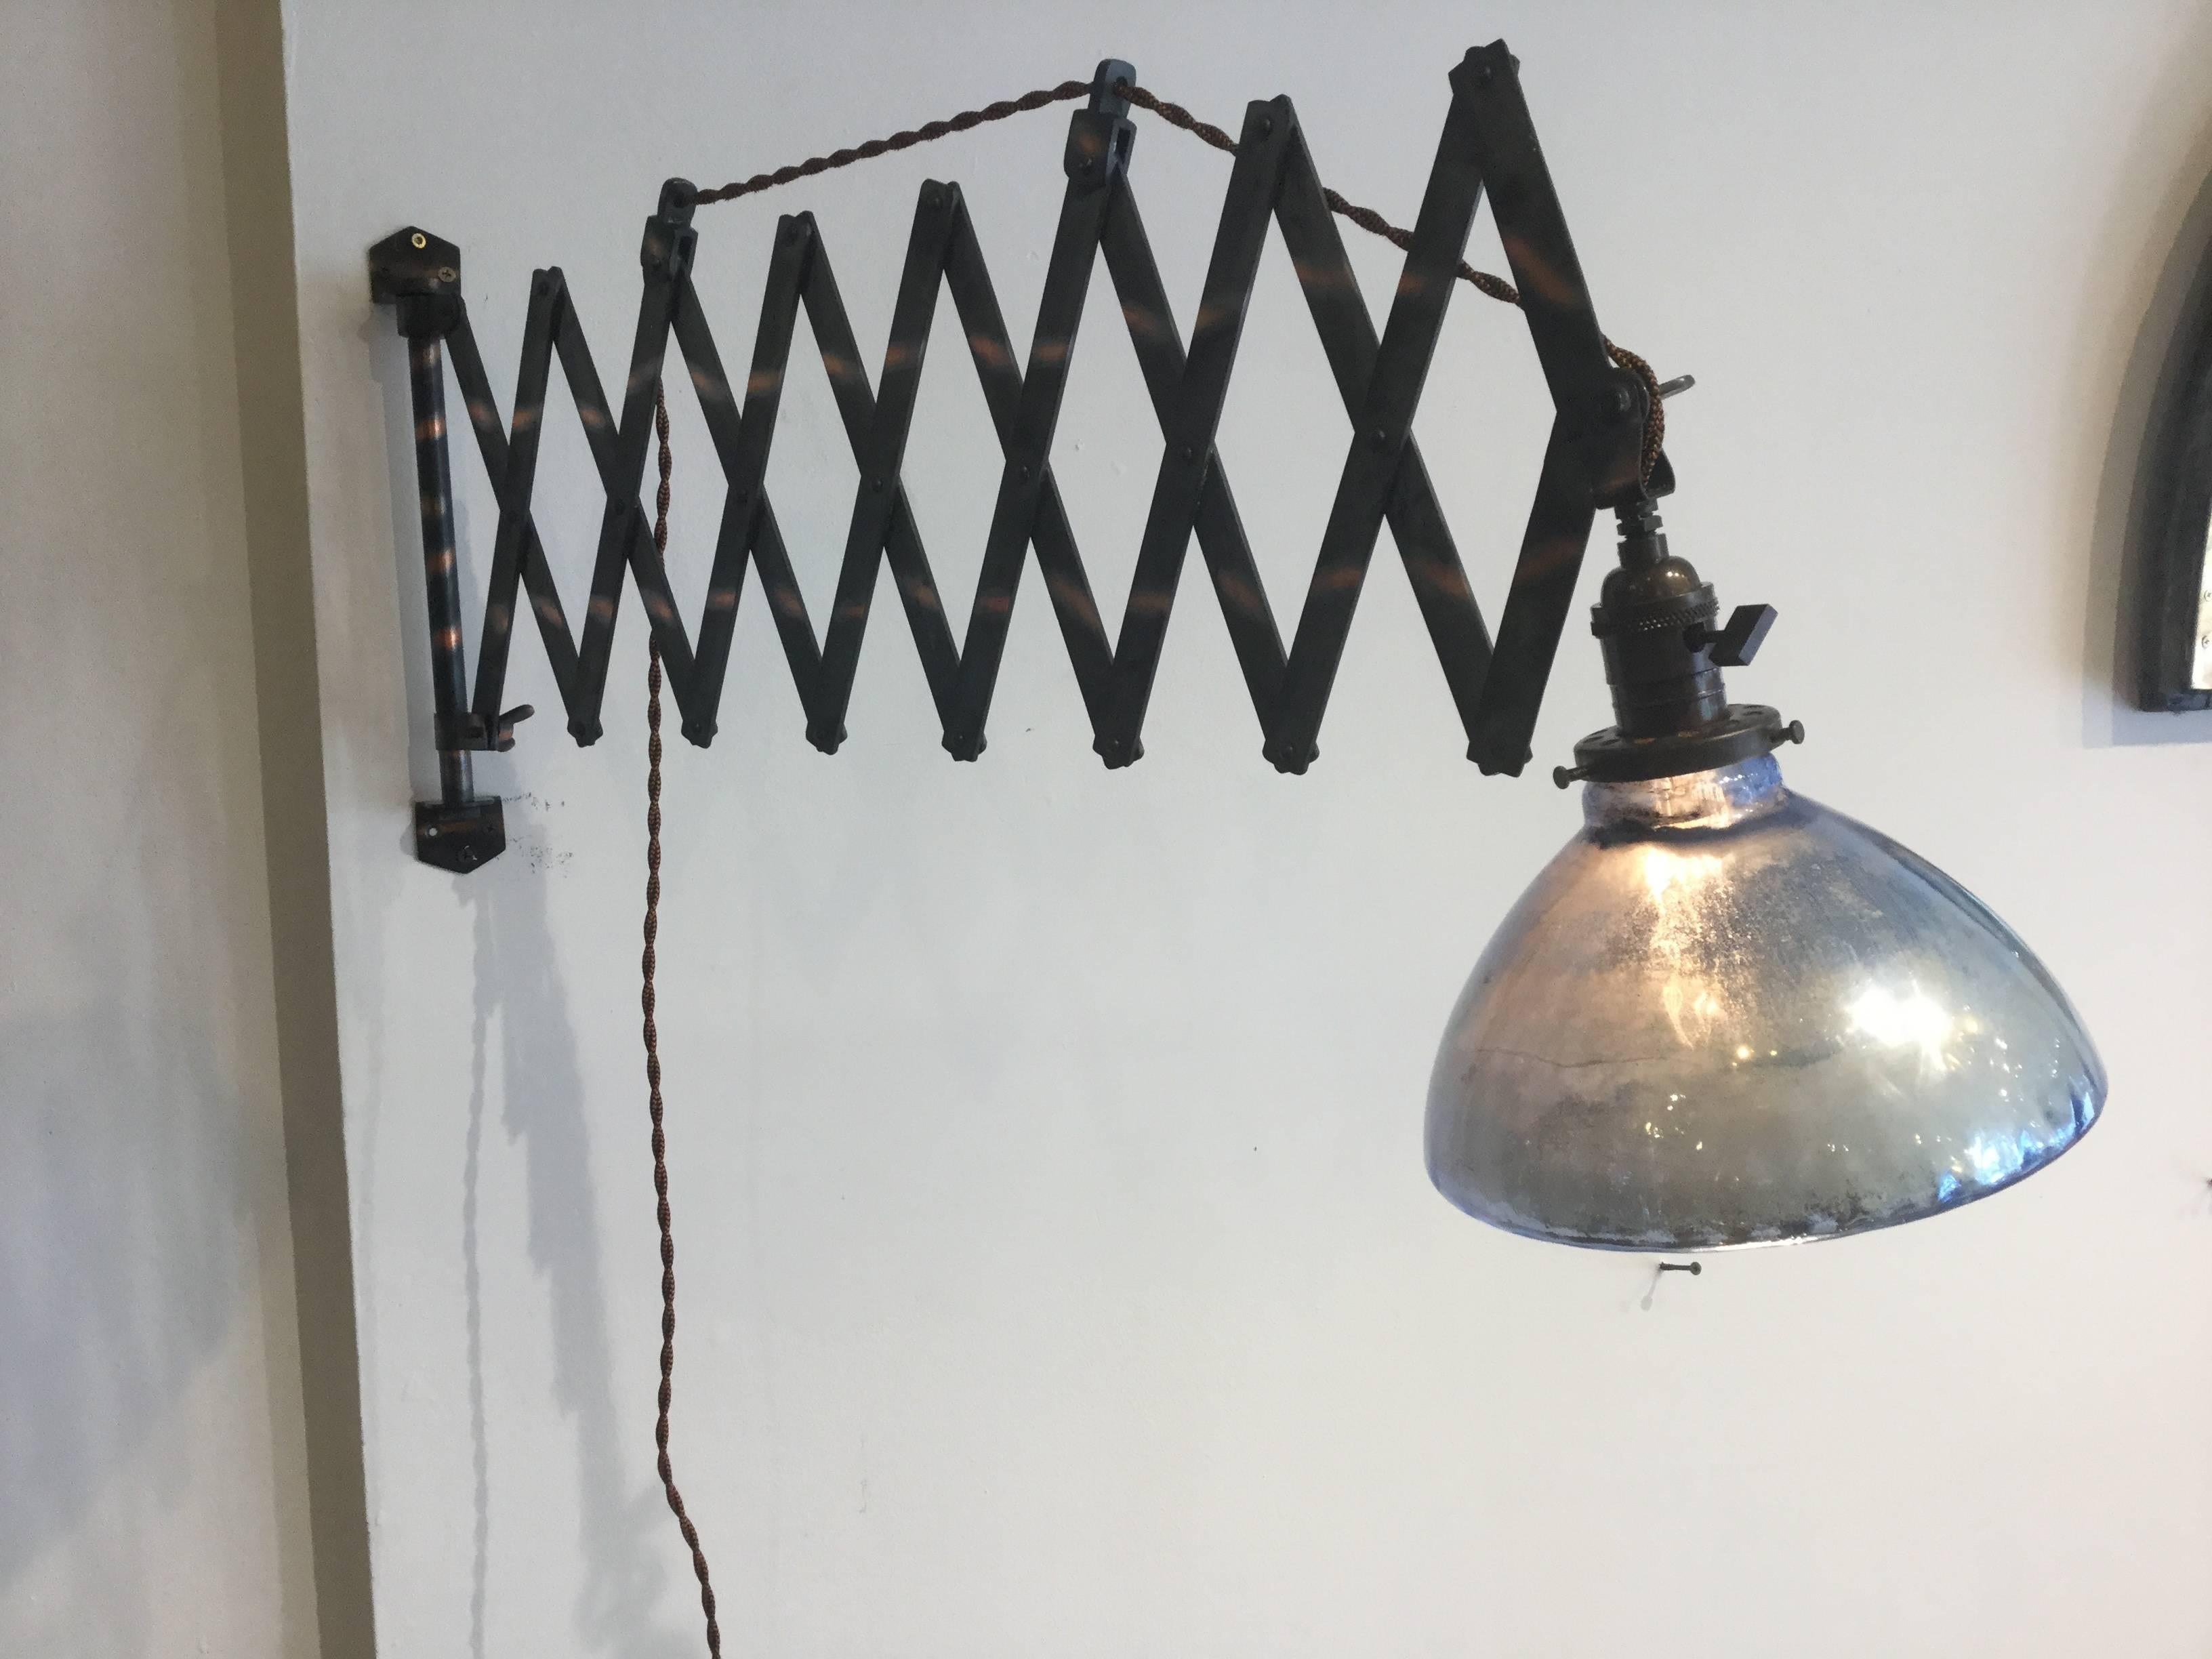 Blue mercury glass shade with japanned scissor Industrial fixture. The blue Mercury looks great with the Copper fixture. Both pieces were made circa 1900. New wiring. Ready to mount on the wall.